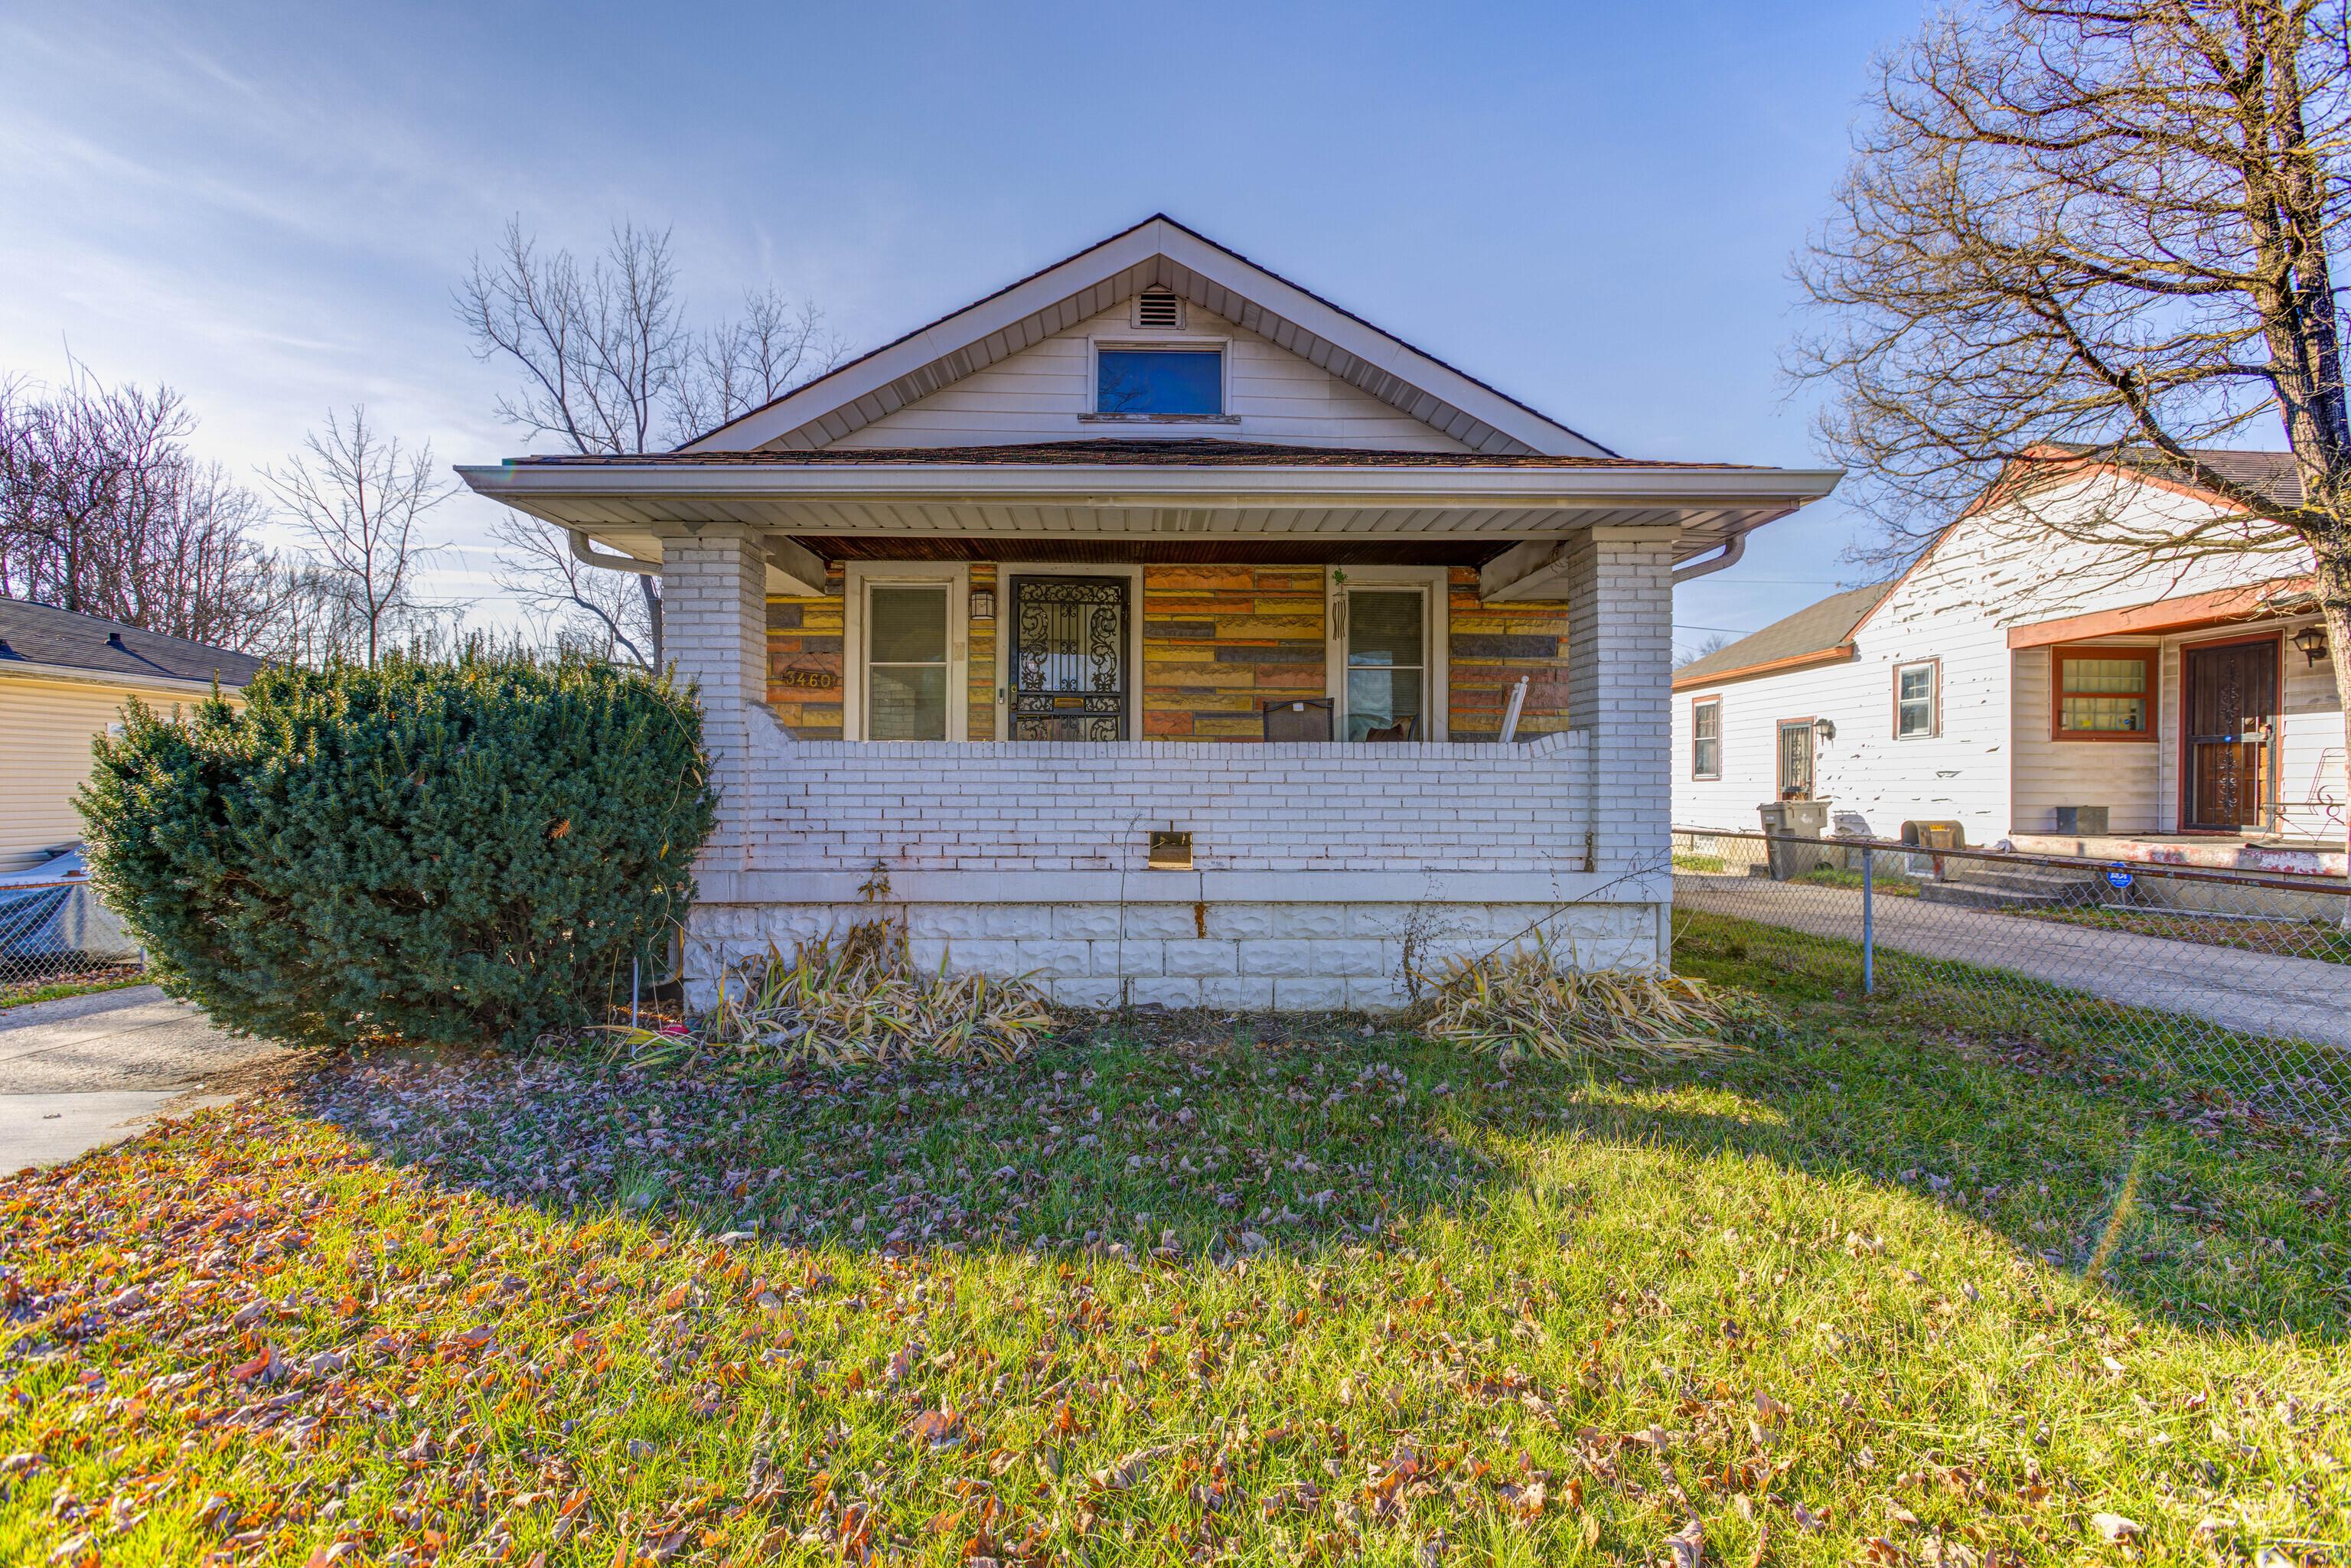 Photo one of 3460 Forest Manor Ave Indianapolis IN 46218 | MLS 21972895